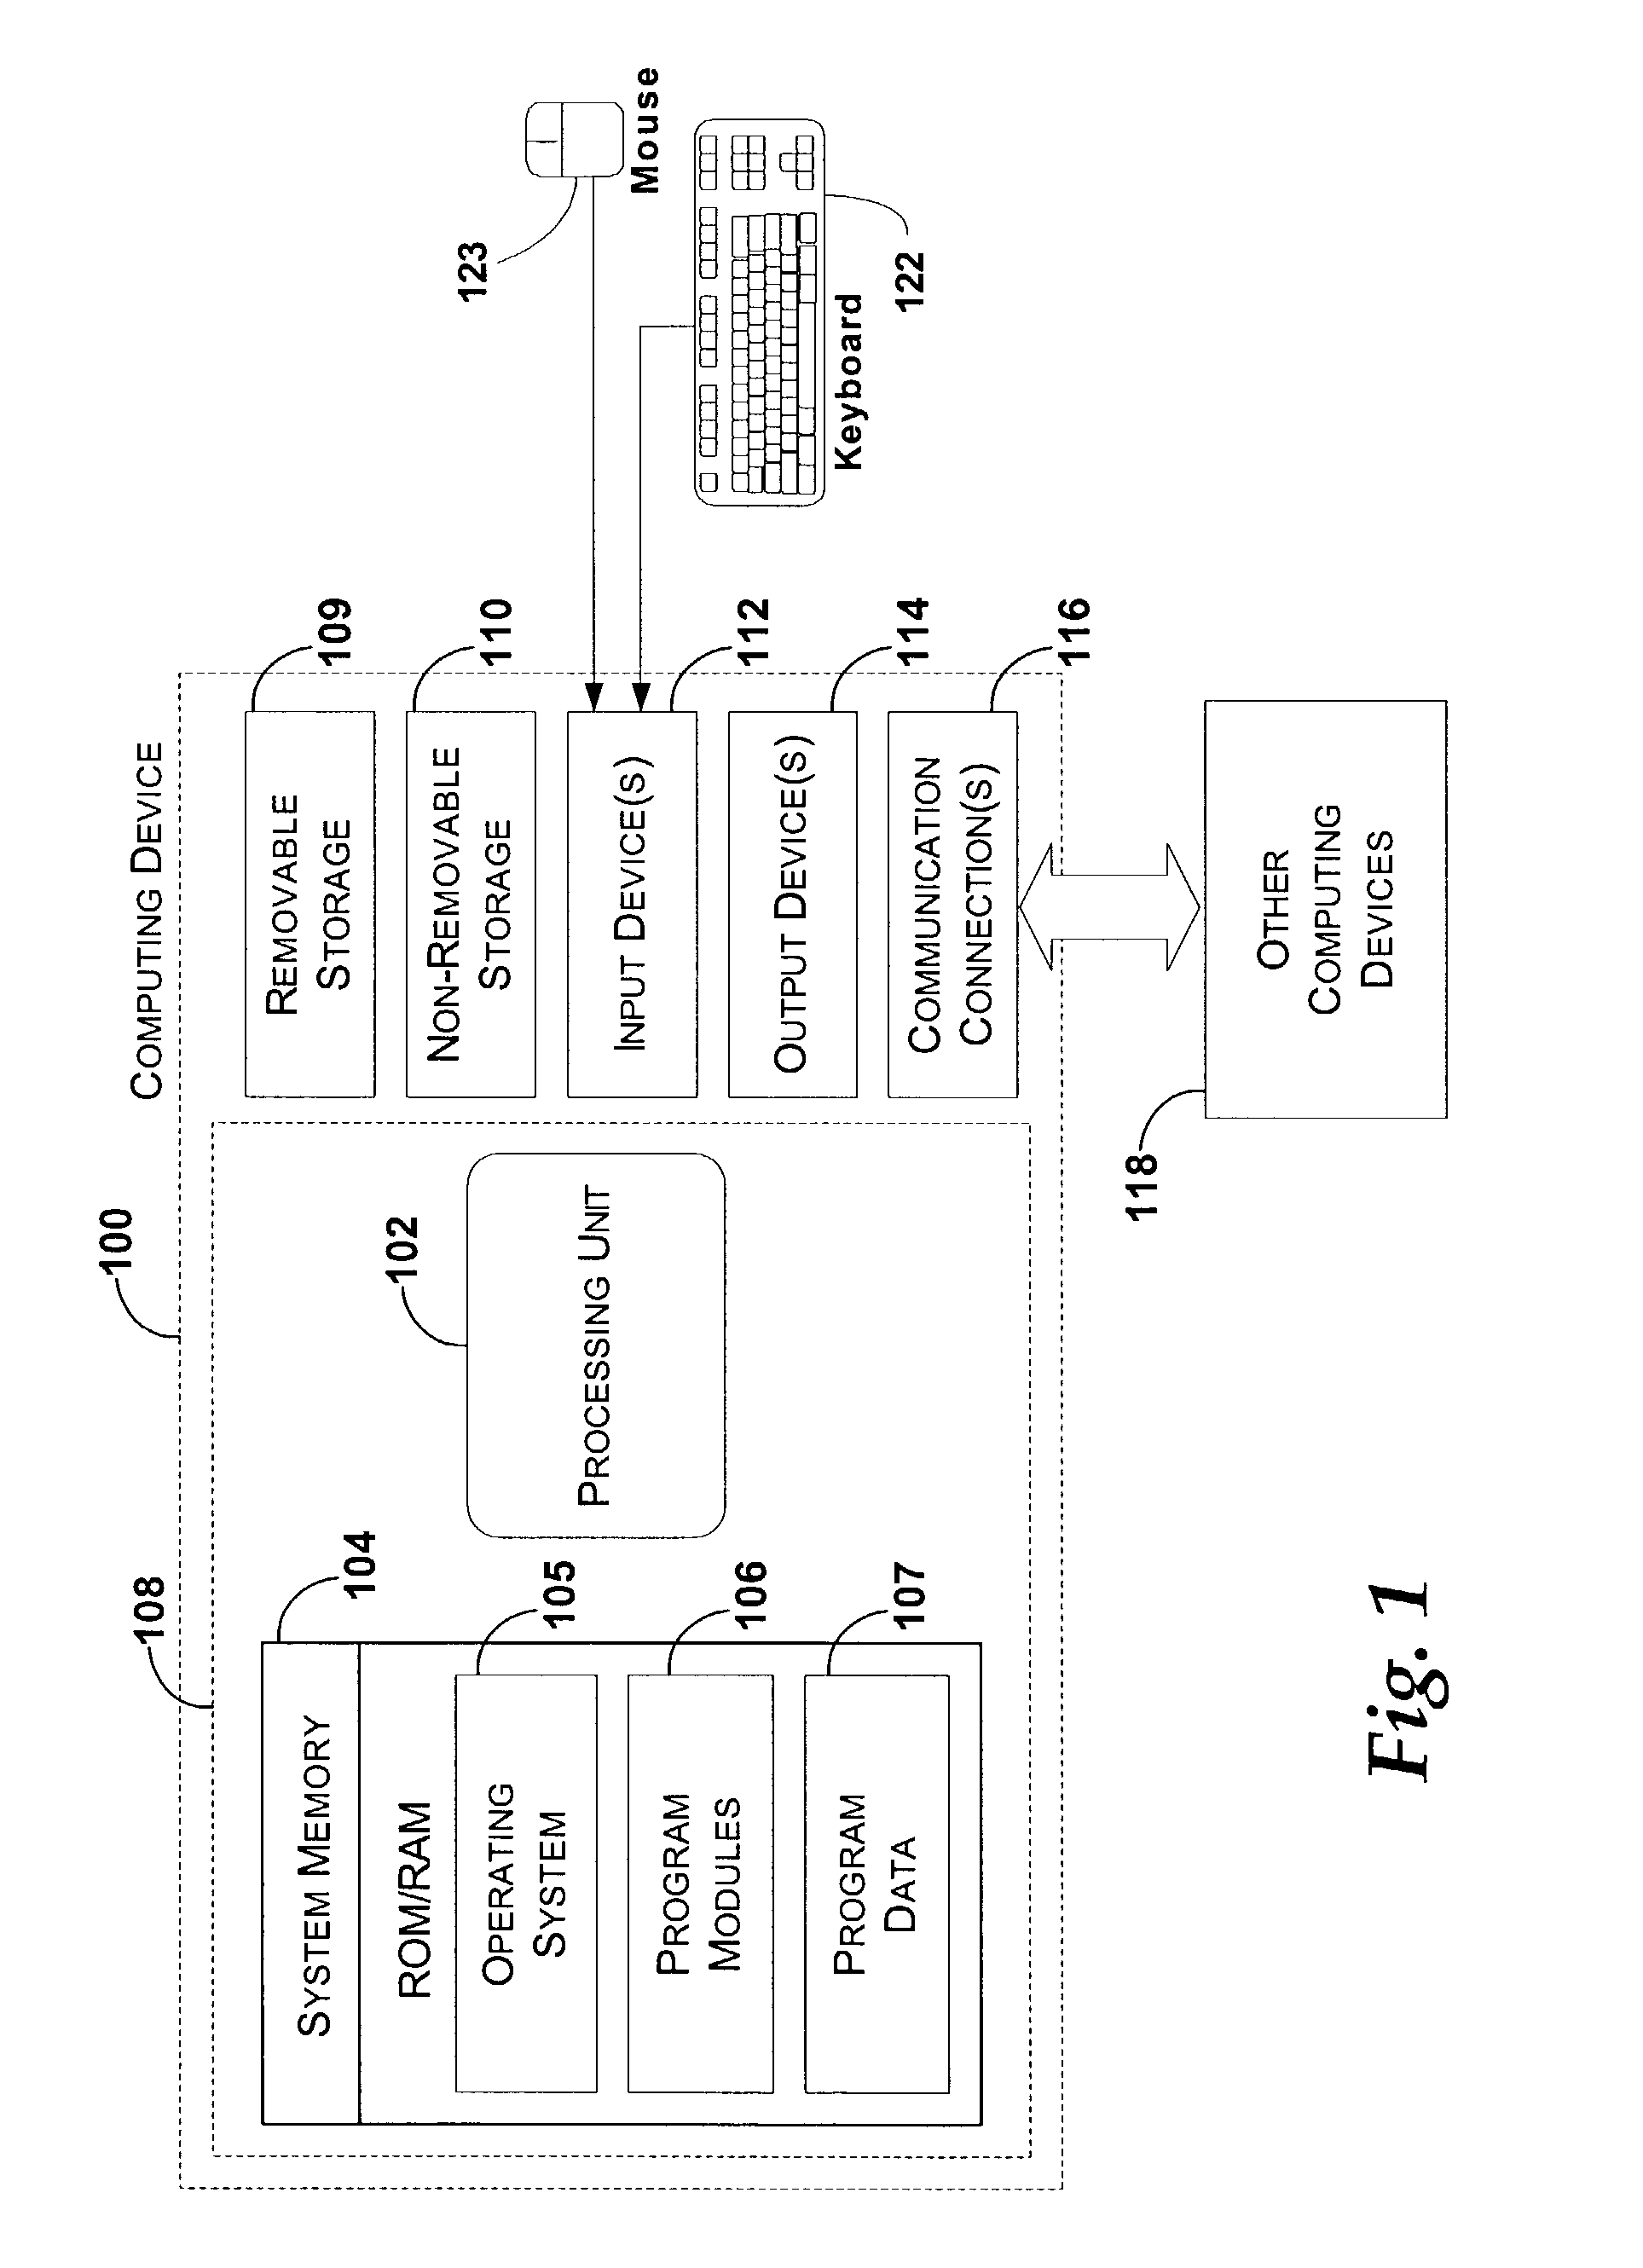 System and method for converting between text formatting or markup language formatting and outline structure